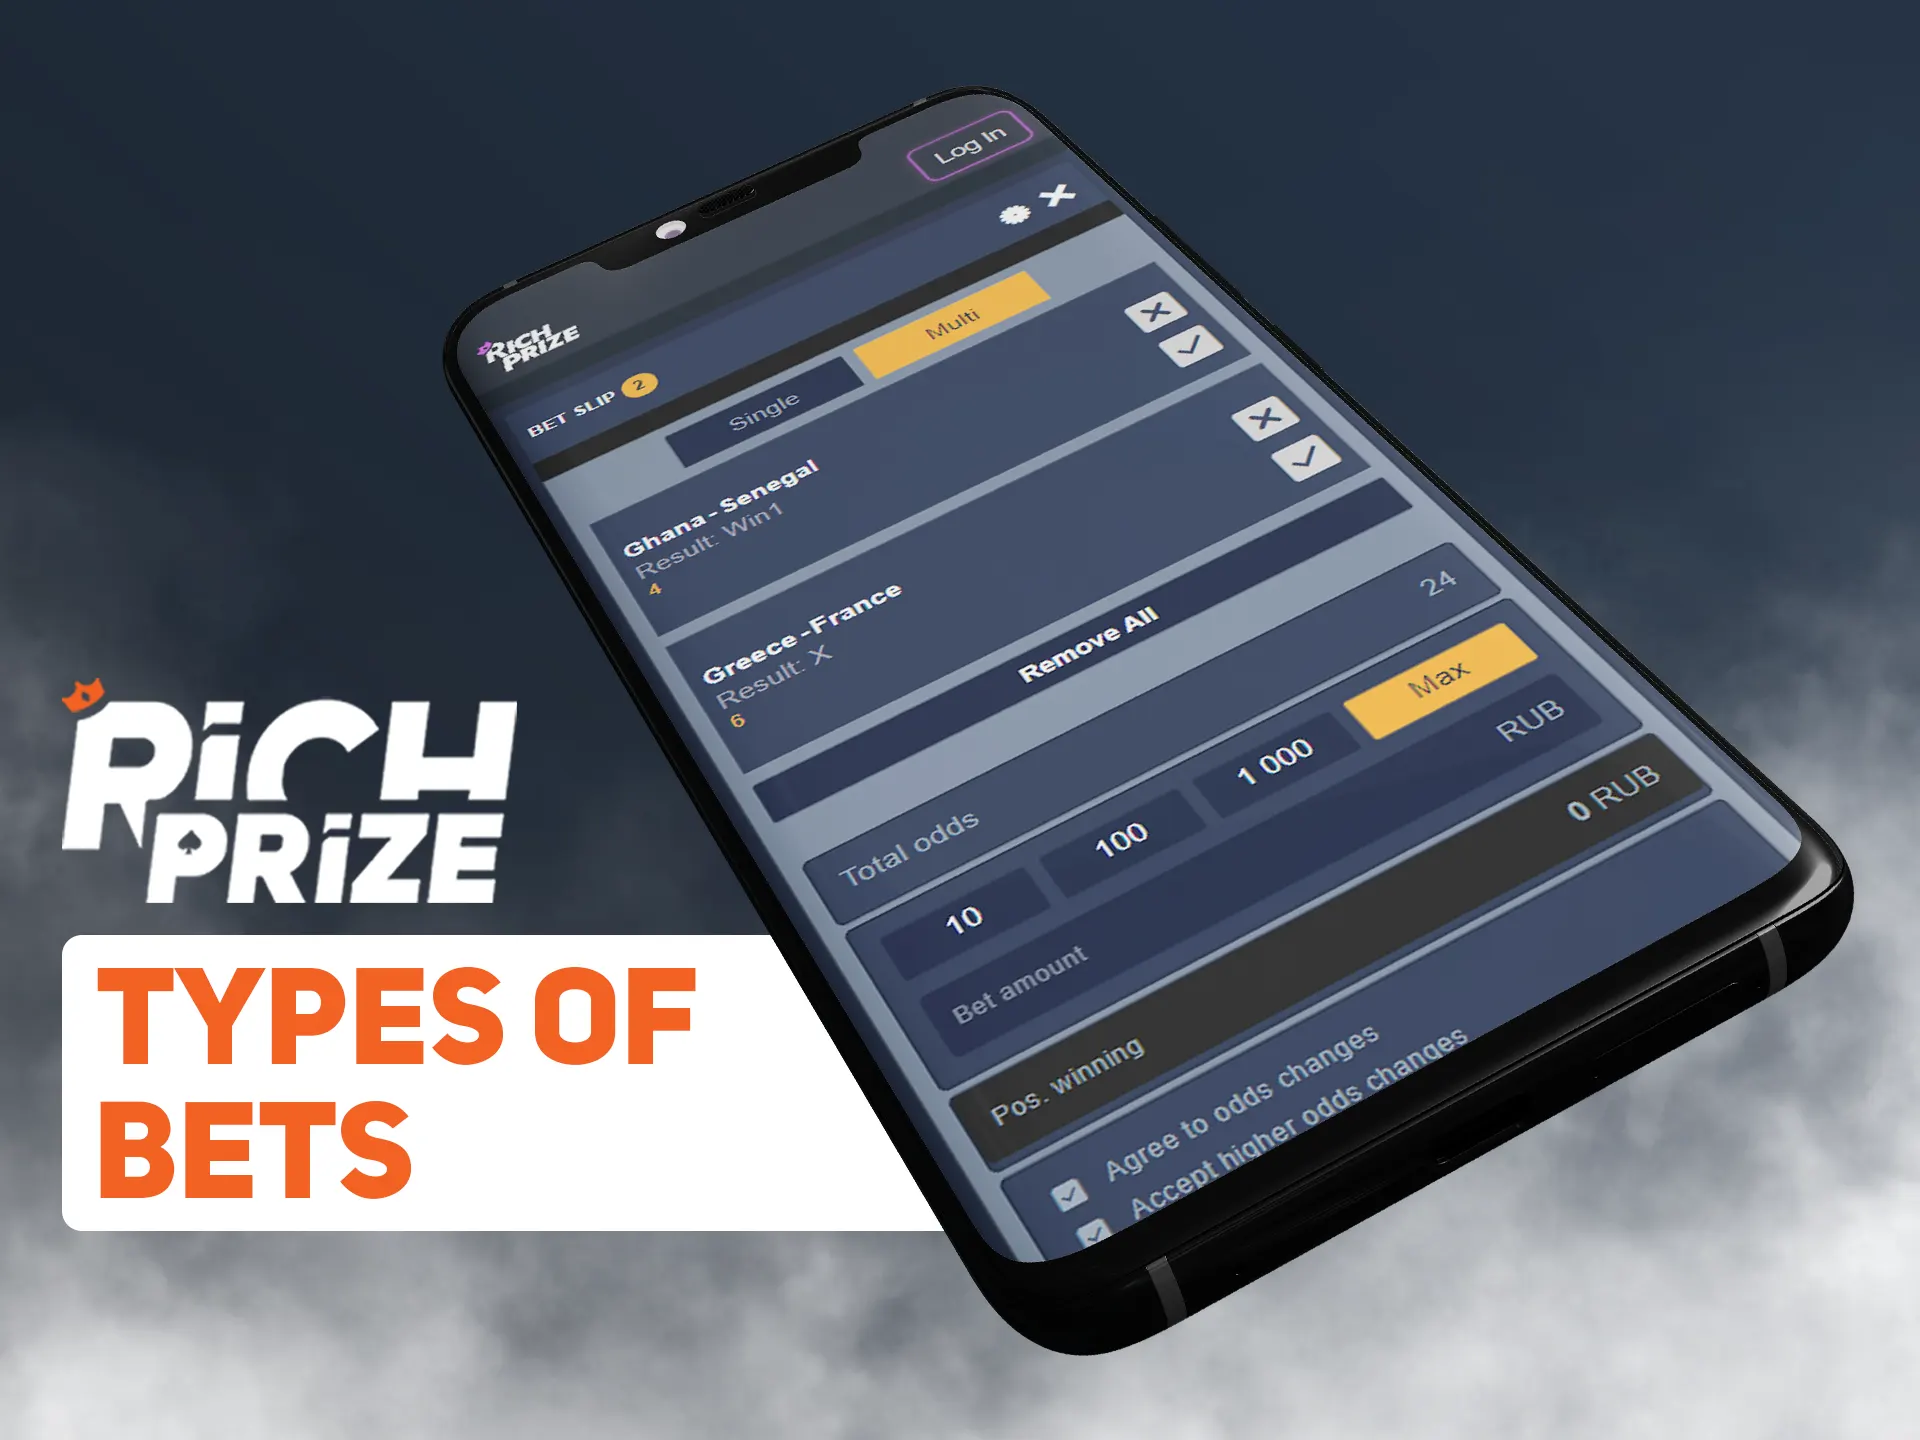 Create your own bet in Richprize app.